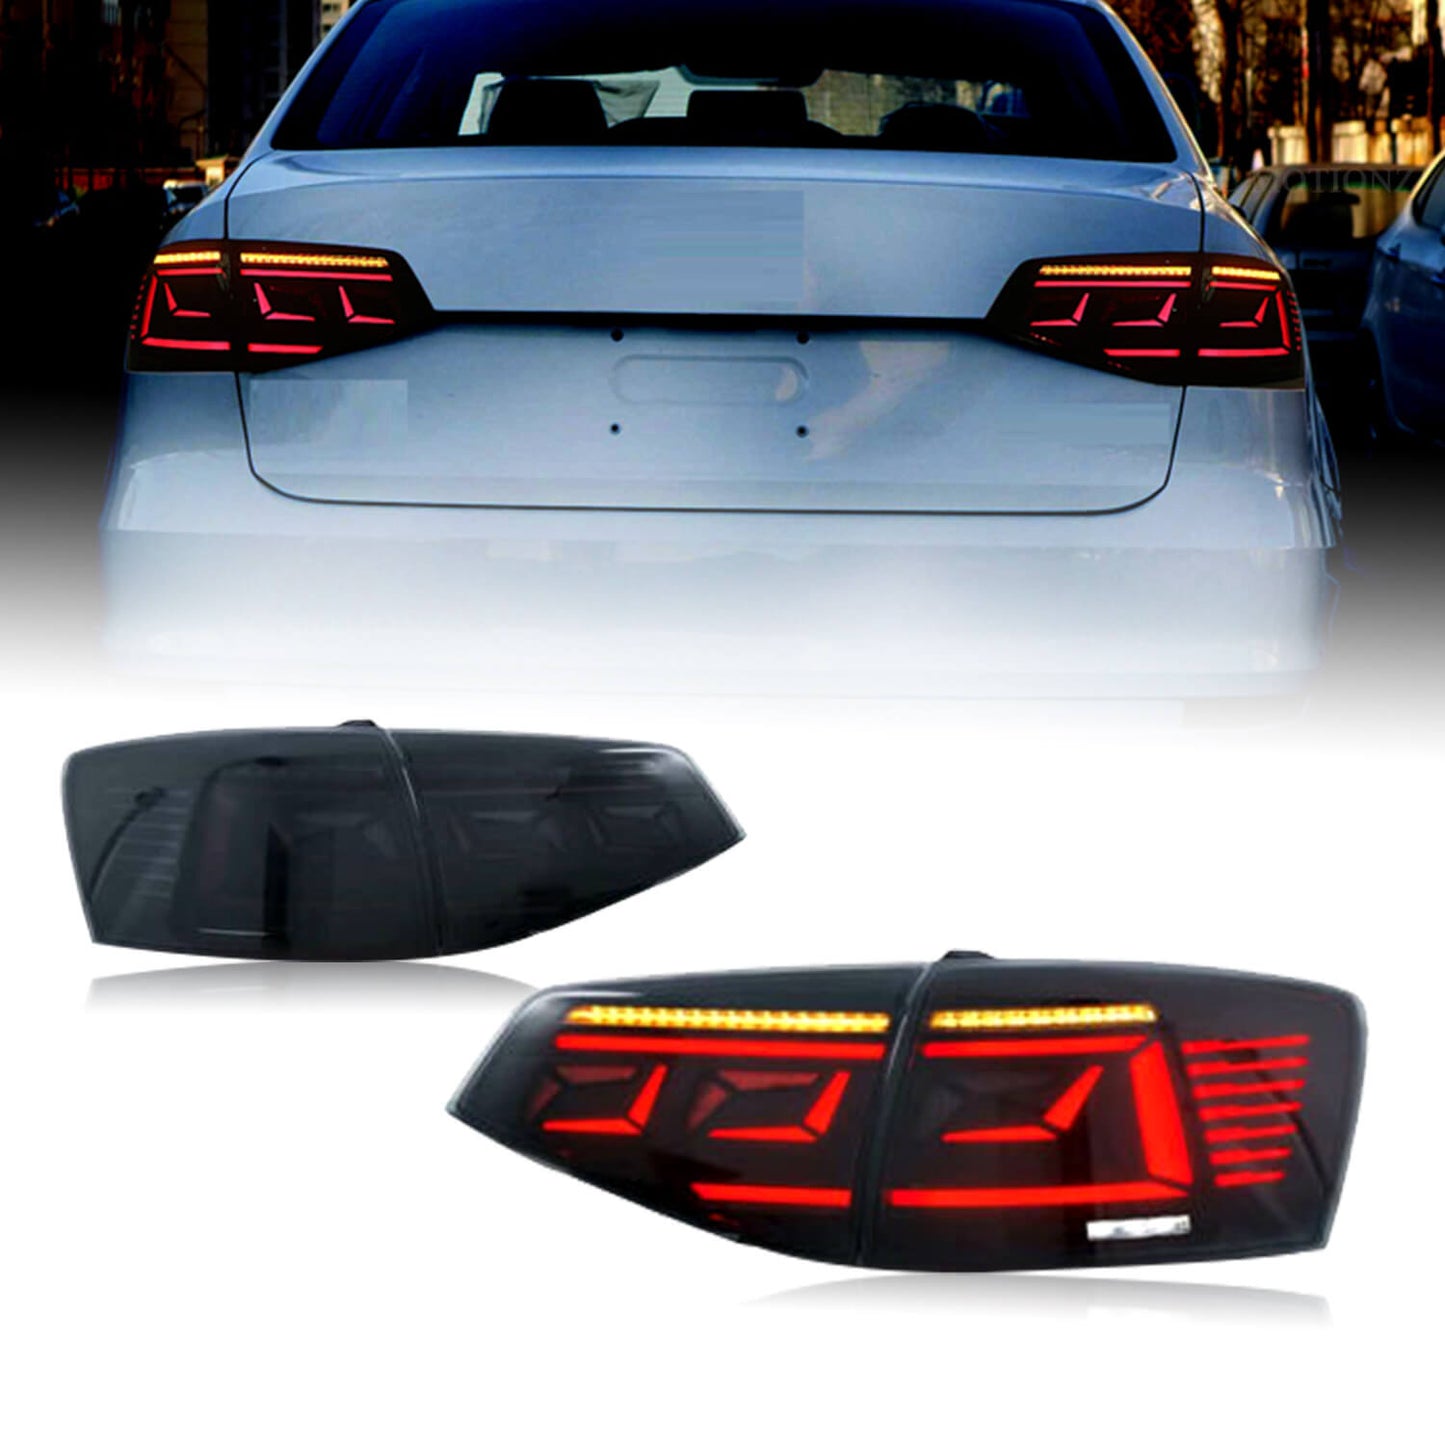 HCMOTION LED Taillights For VW Jetta MK6 2015-2018